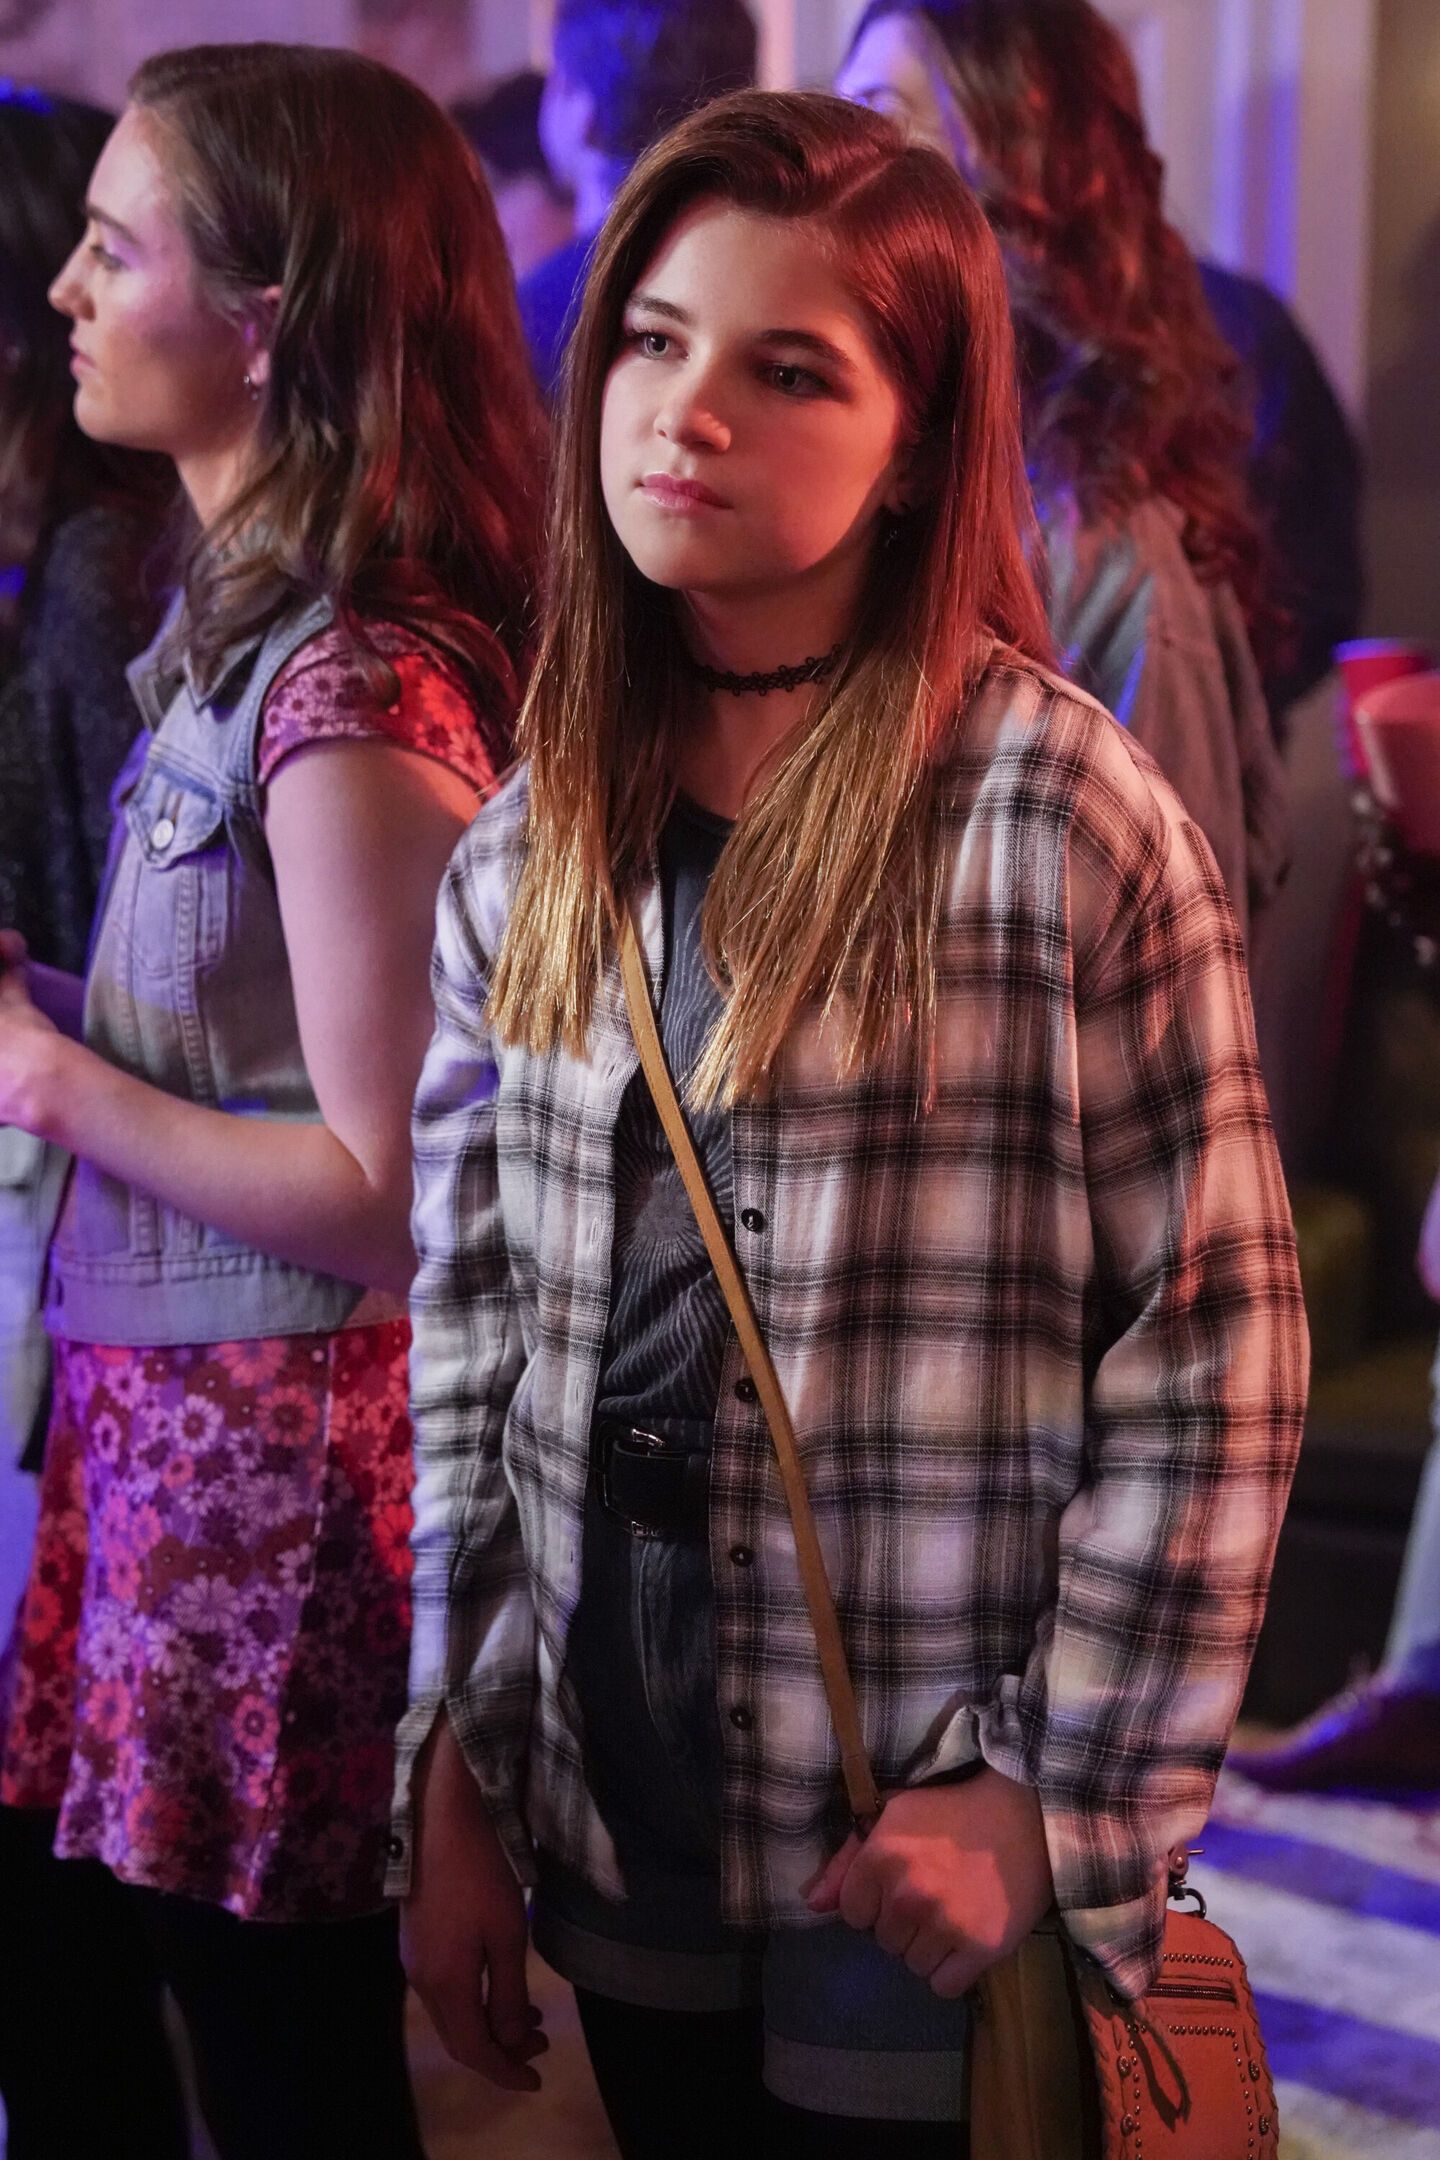 Missy looking defiant in a party in Young Sheldon season 6 episode 13